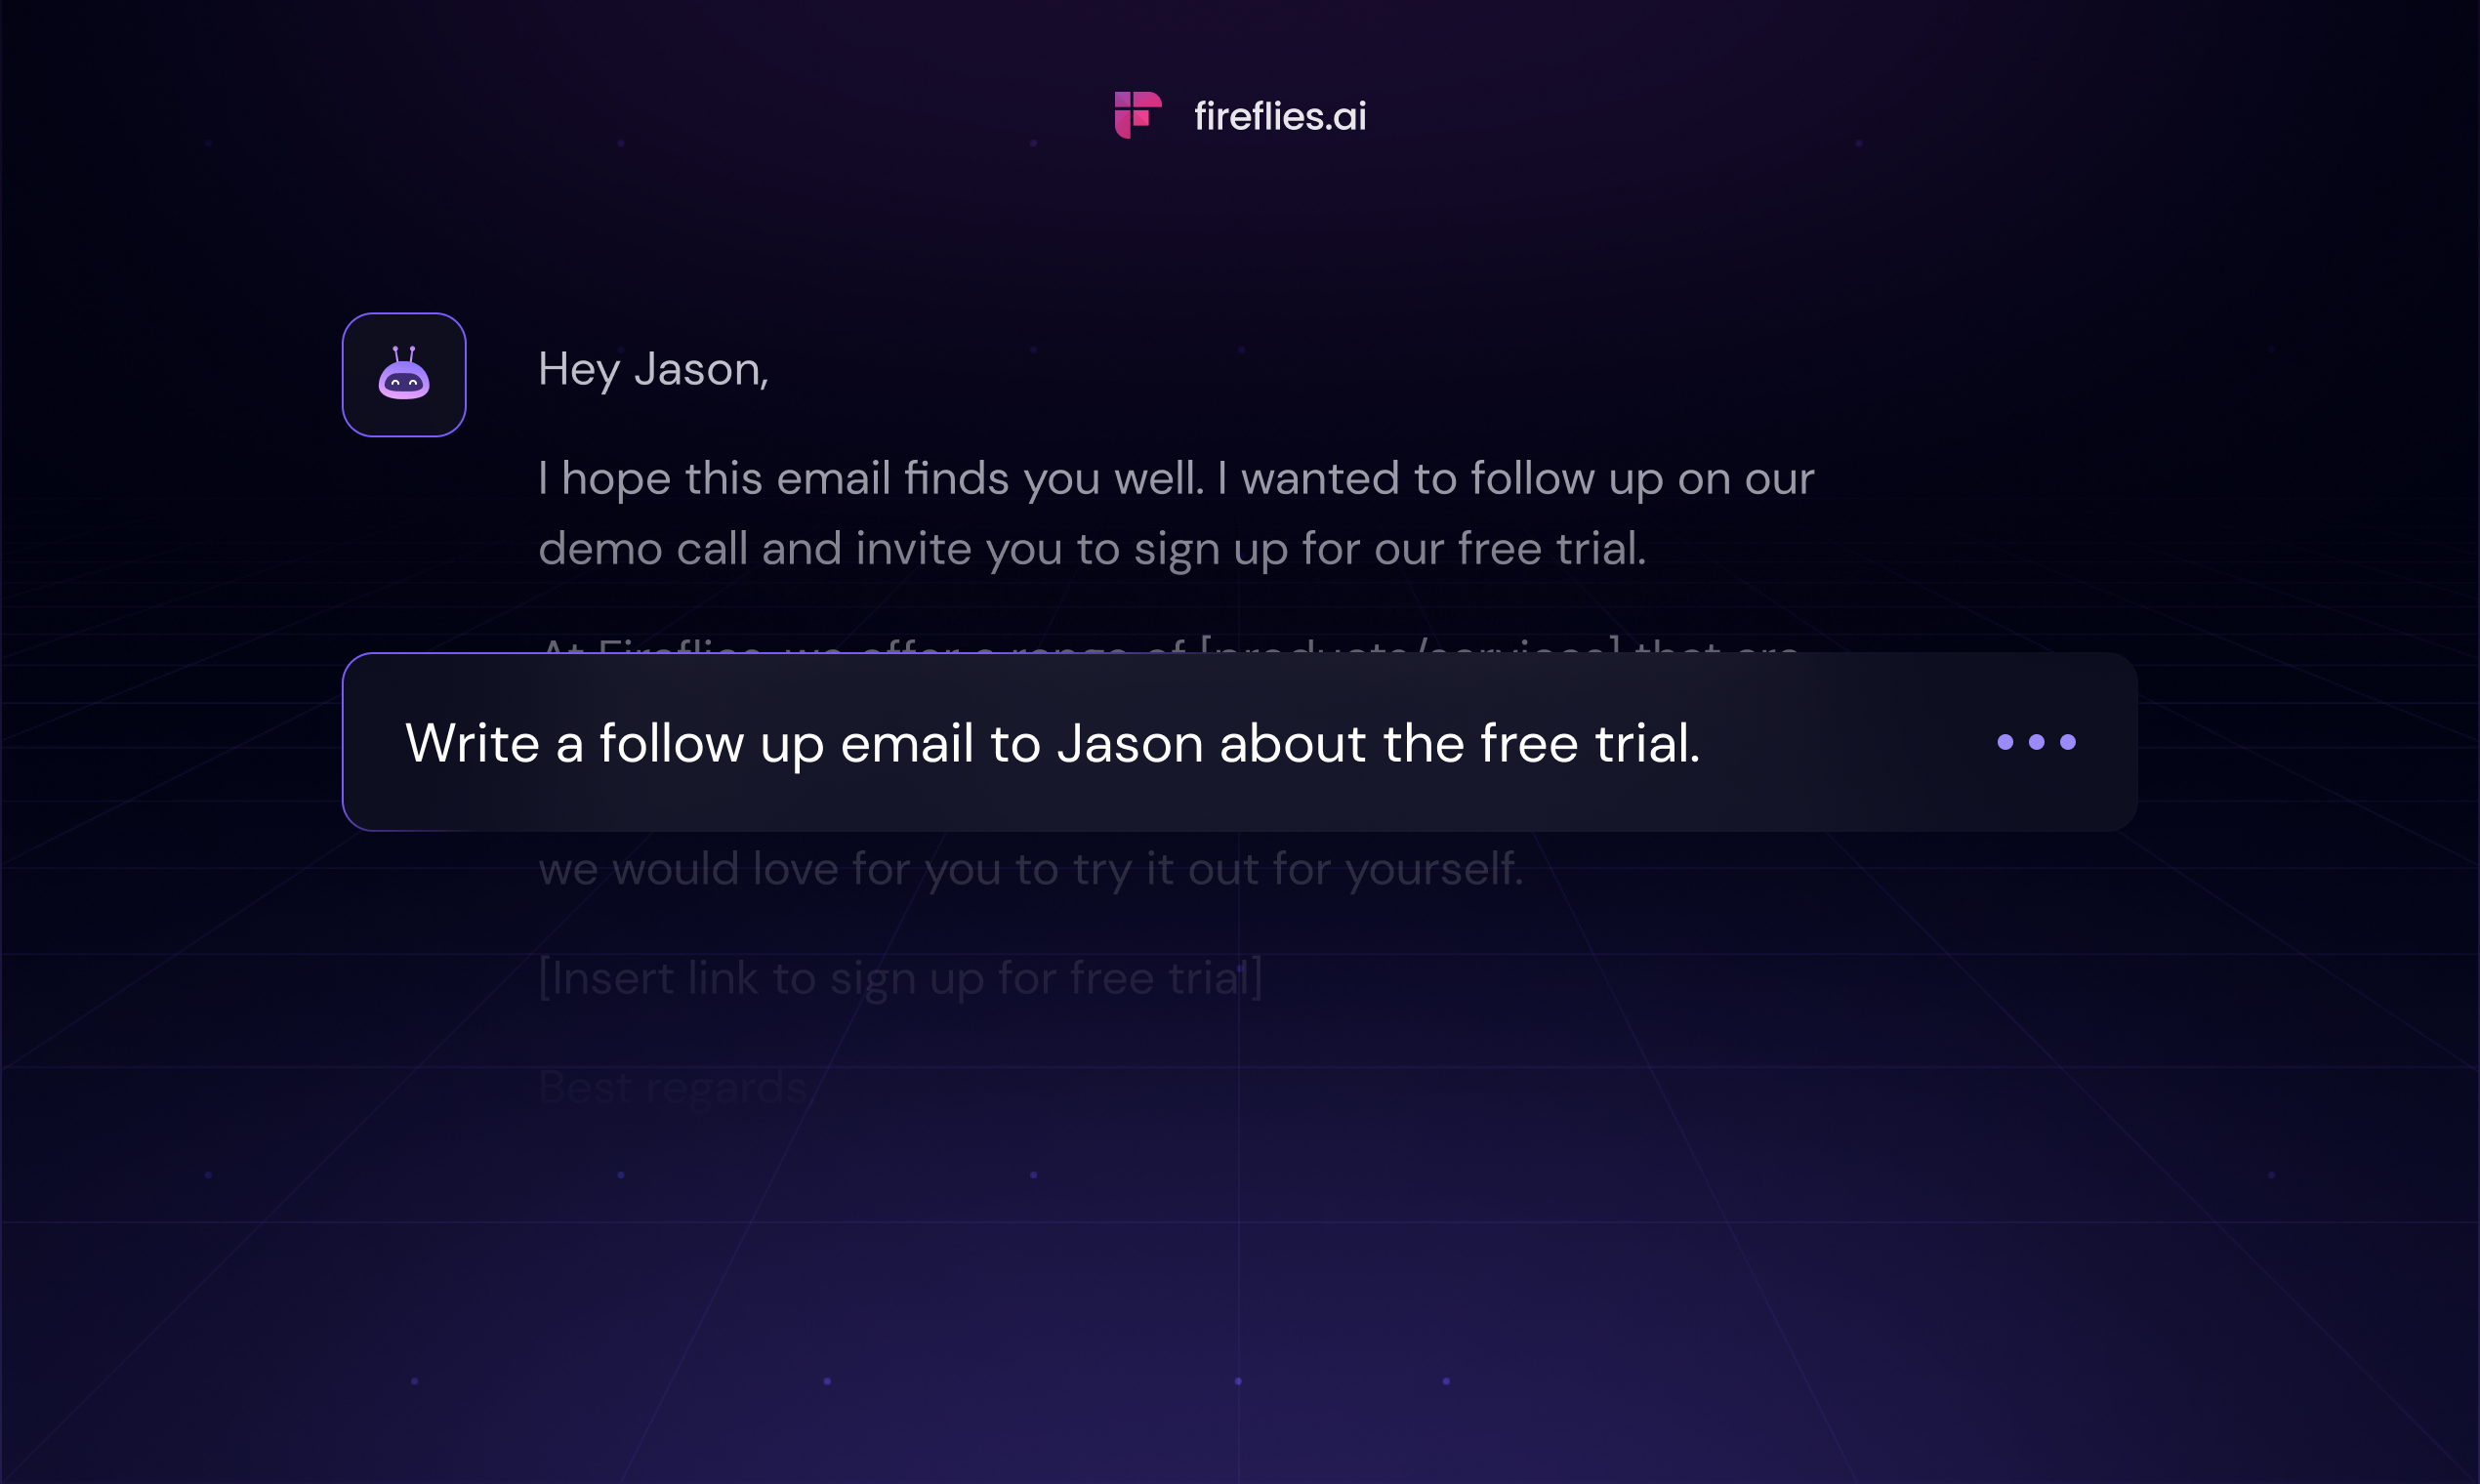 AskFred: ChatGPT for meetings